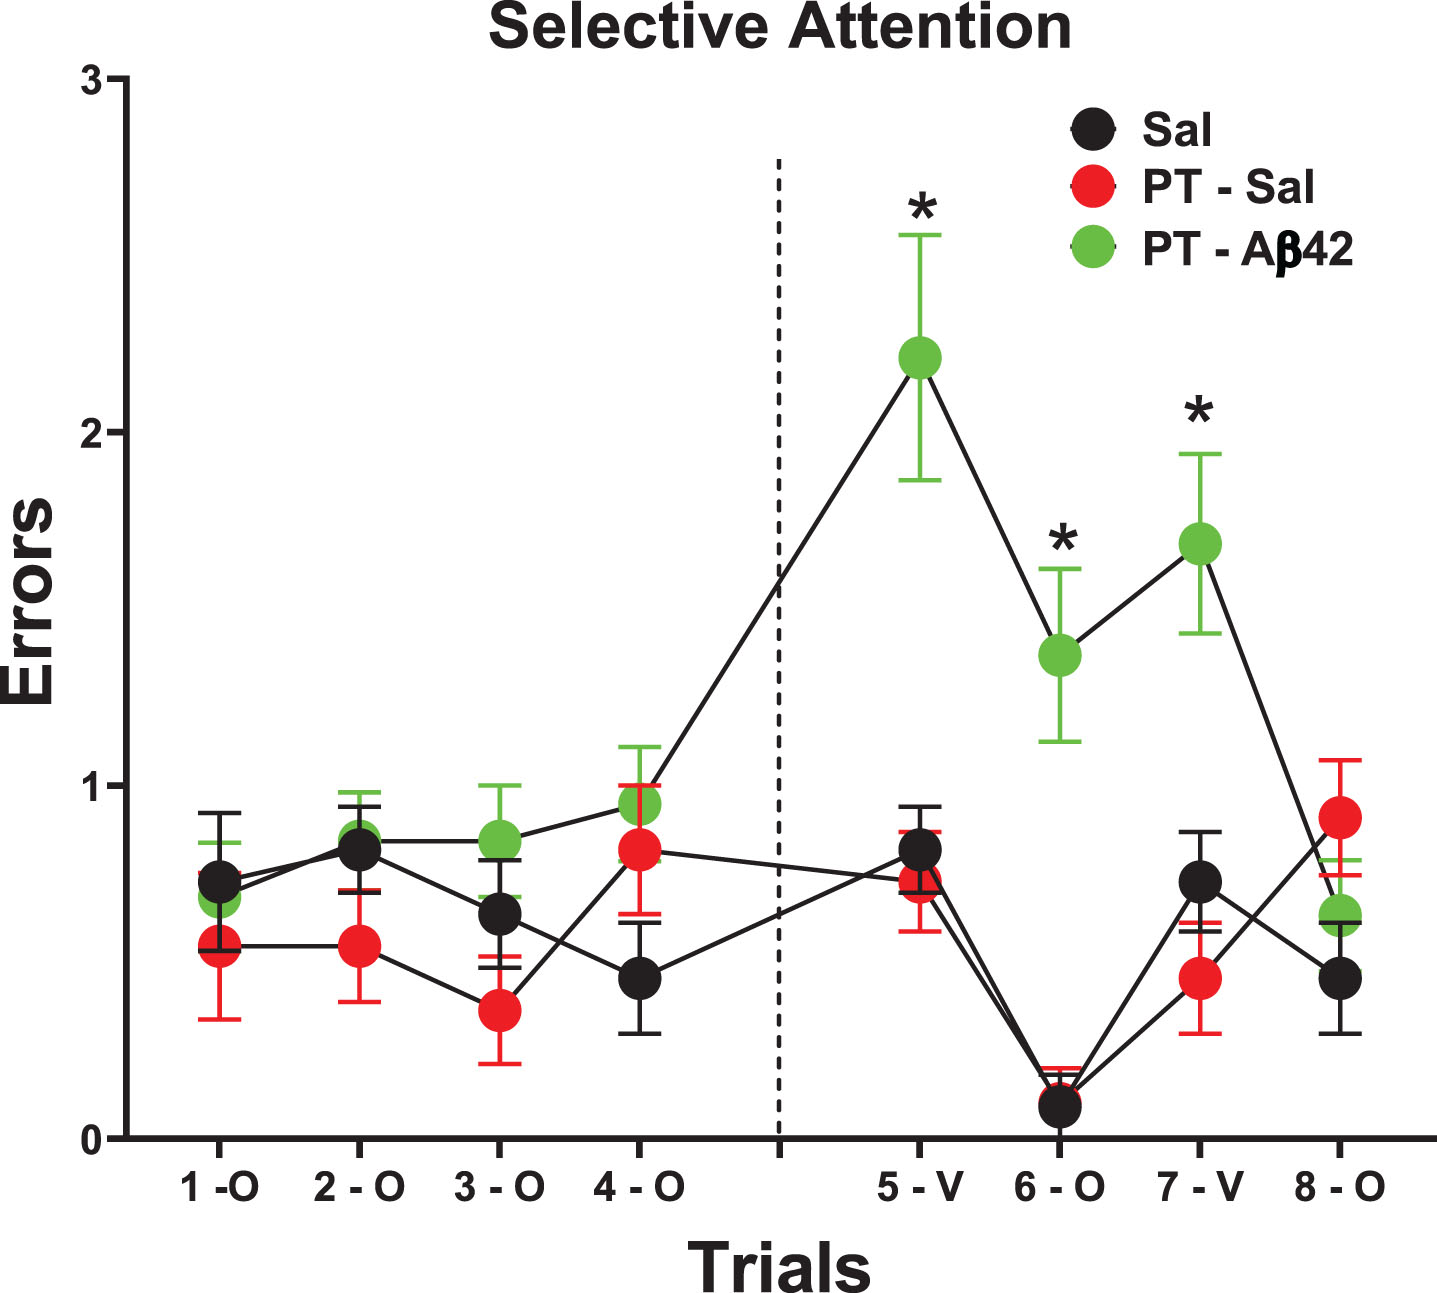 Selective Attention/Disengagement is reduced in mice treated with PT-A
β42. Animals were trained on both odor and visual discriminations, each in a distinct context. On Trials 1- to 4, mice were tested on odor discrimination with visual discrimination cues present as distractors. All groups performed similarly on these tests. On Trials 5–8, mice were tested either on the visual discrimination with odor distractor cues present (Trials 5–V & 7-V), or on the odor discrimination with visual distractor cues present (Trials 6 & 8). PT-Aβ42 mice demonstrated increased errors and performed poorly relative to the PT-Sal and Sal groups. Significant differences between PT-Aβ42 and the other two groups are noted. These results indicated that PT-Aβ42 mice could not disengage from a previously reinforced cue, indicative of a failure of selective attention (*p < 0.05).